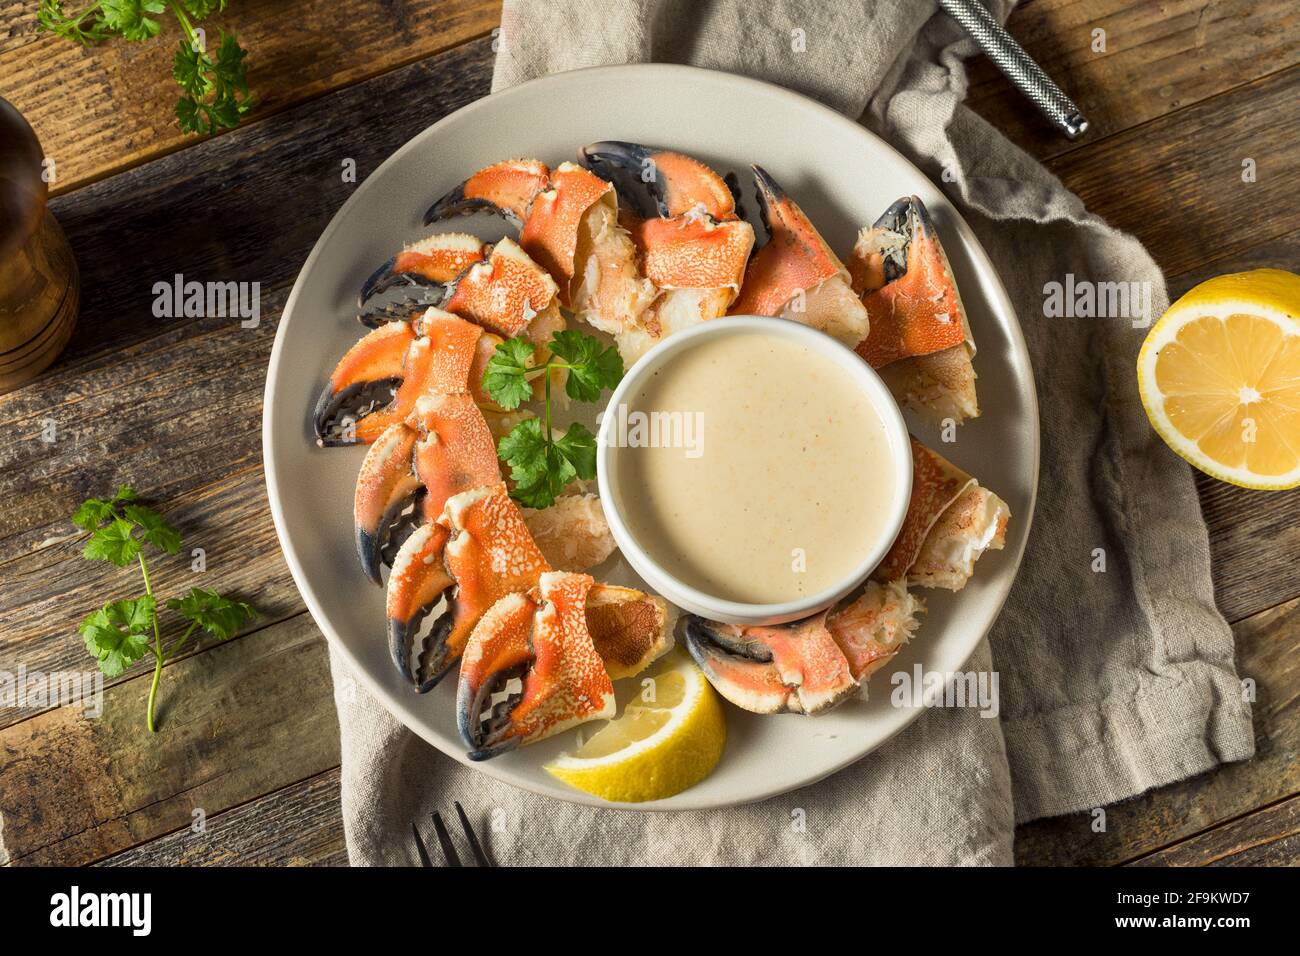 Homemade Steamed Stone Crab Claws with Dipping Sauce Stock Photo